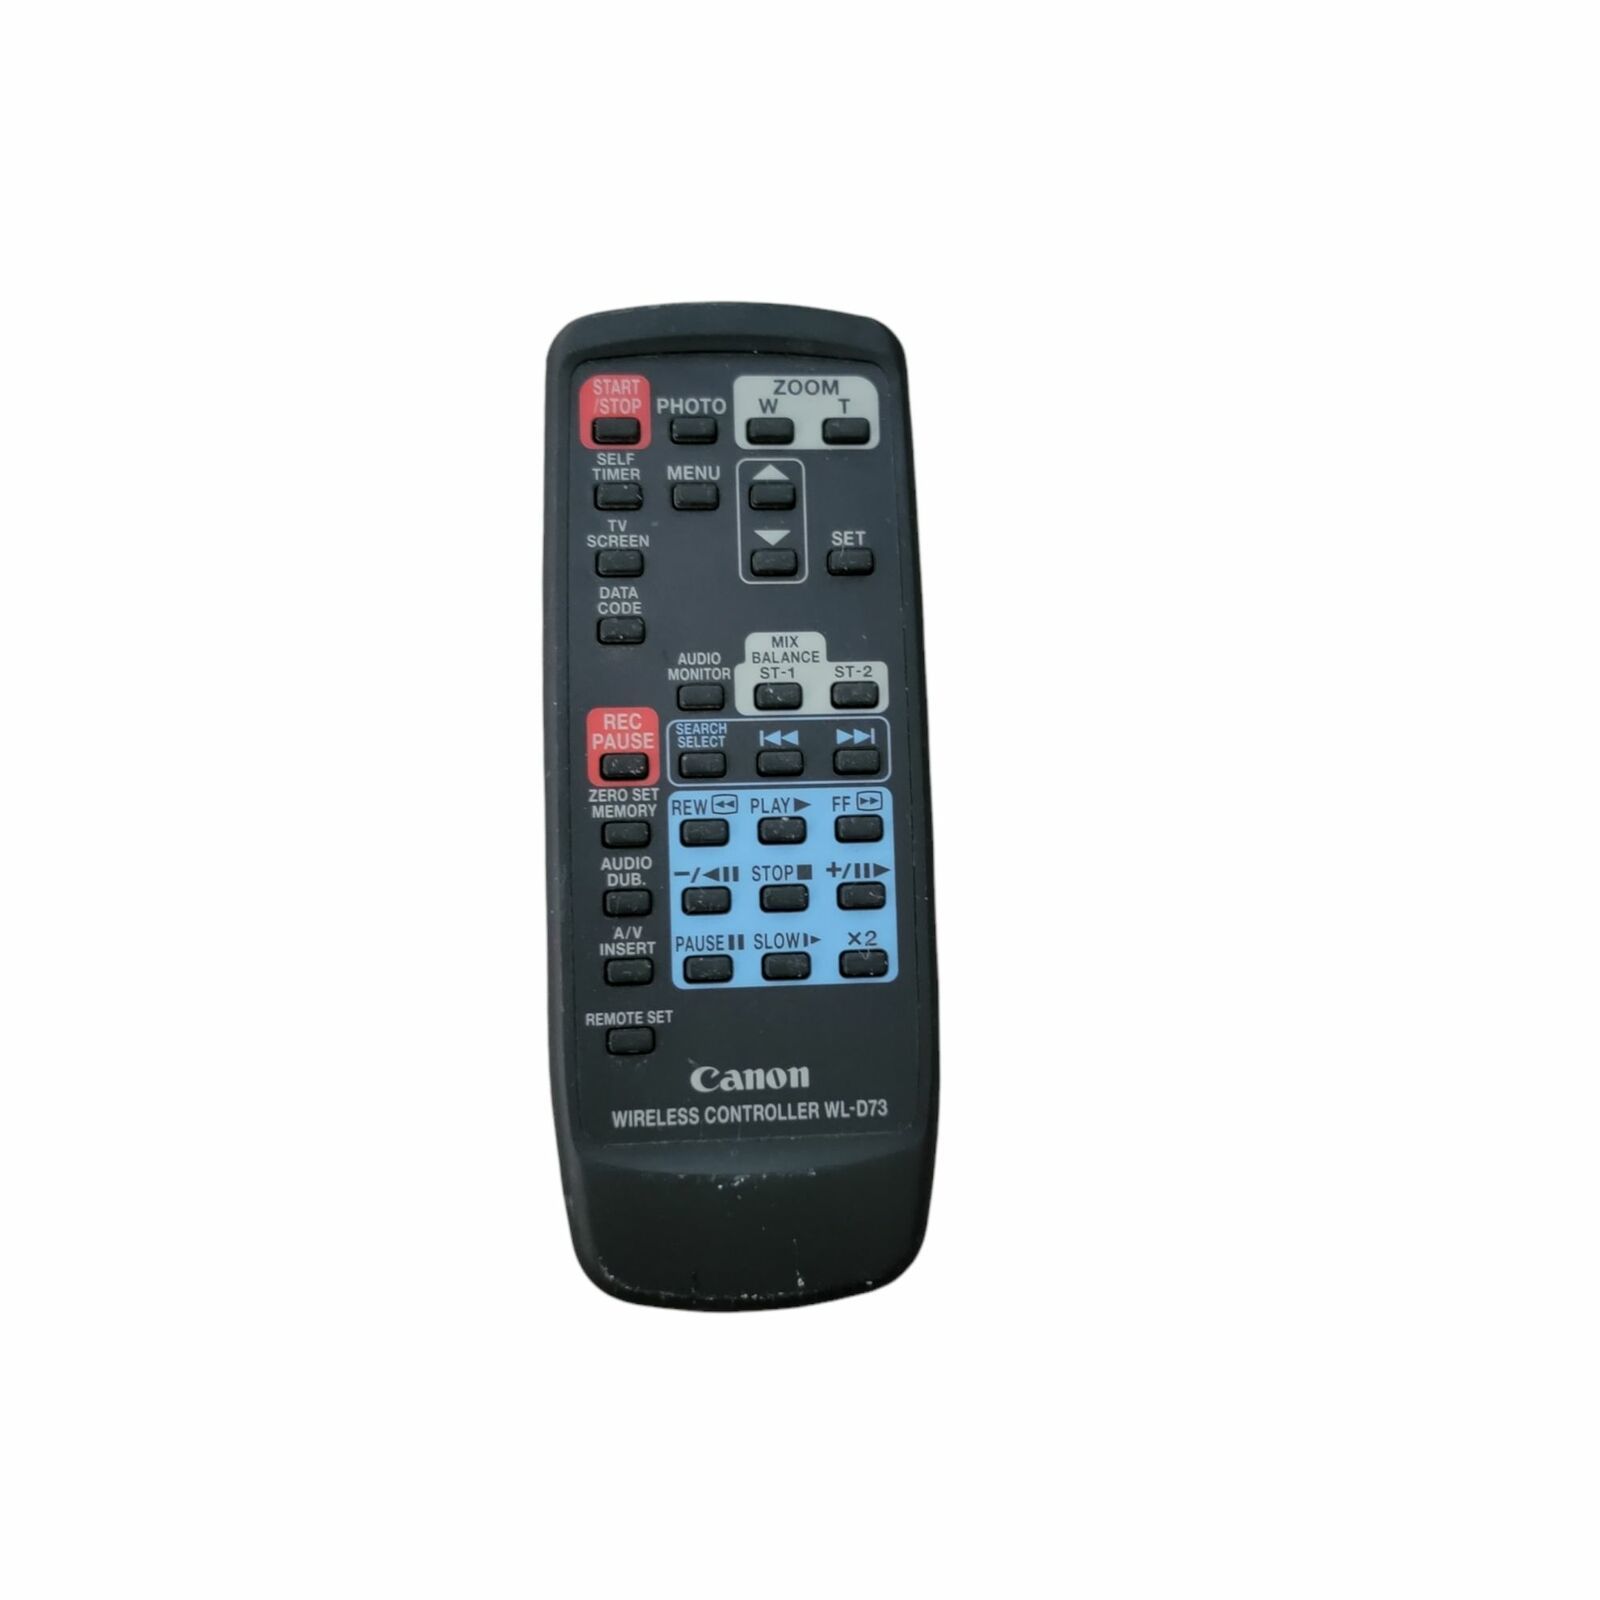 Genuine Canon Wireless Camcorder Remote Control WL-D73 Tested and Works - $11.74